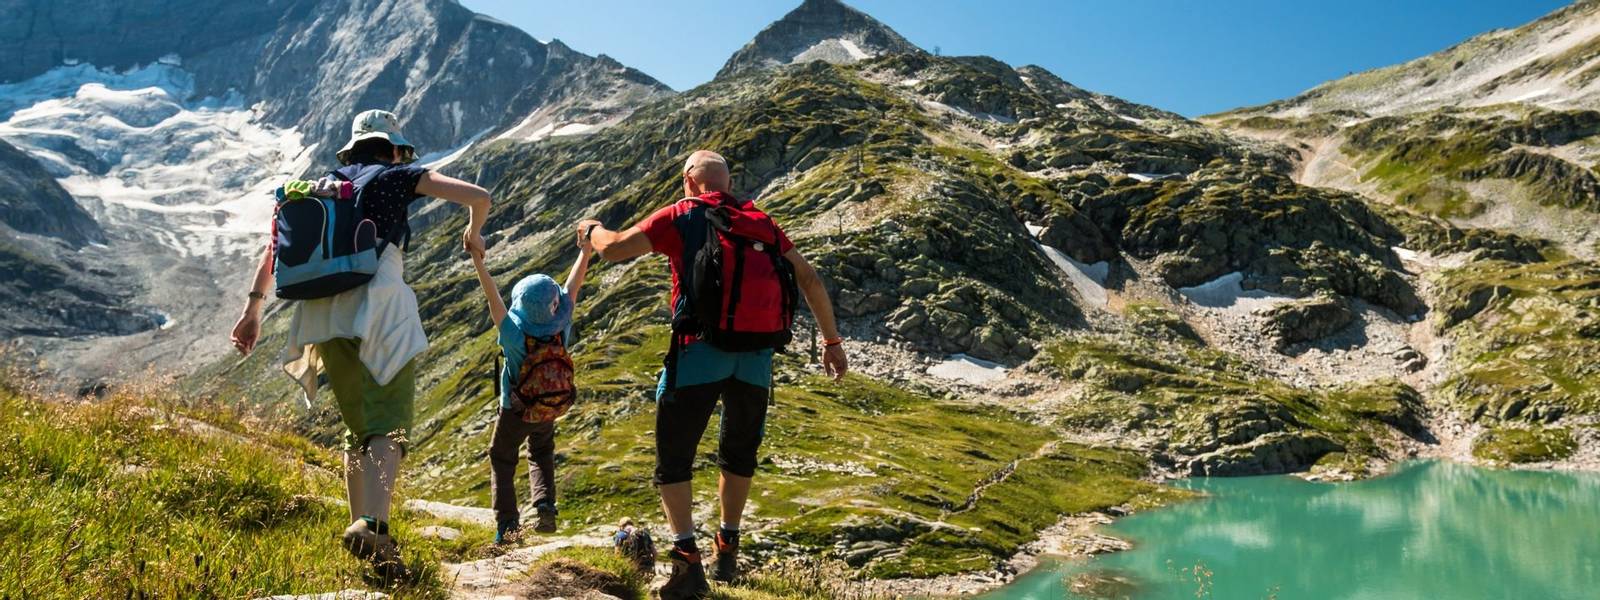 family with child hiking on holiday in austrian alps with lake and glacier view